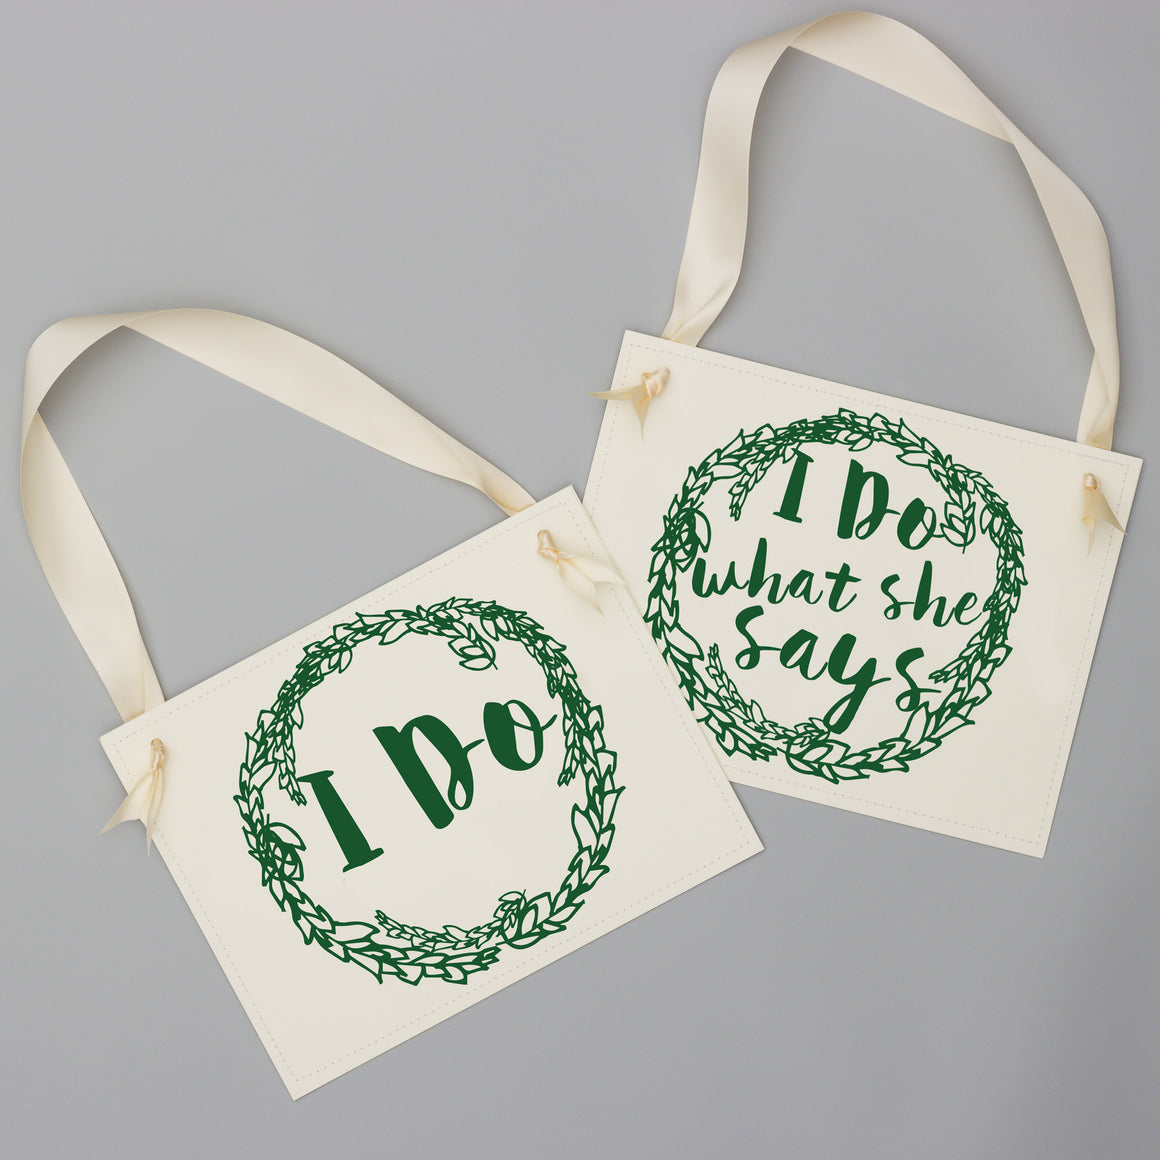 Wedding Chair Signs "I Do" / "I Do What She Says" | Set of 2